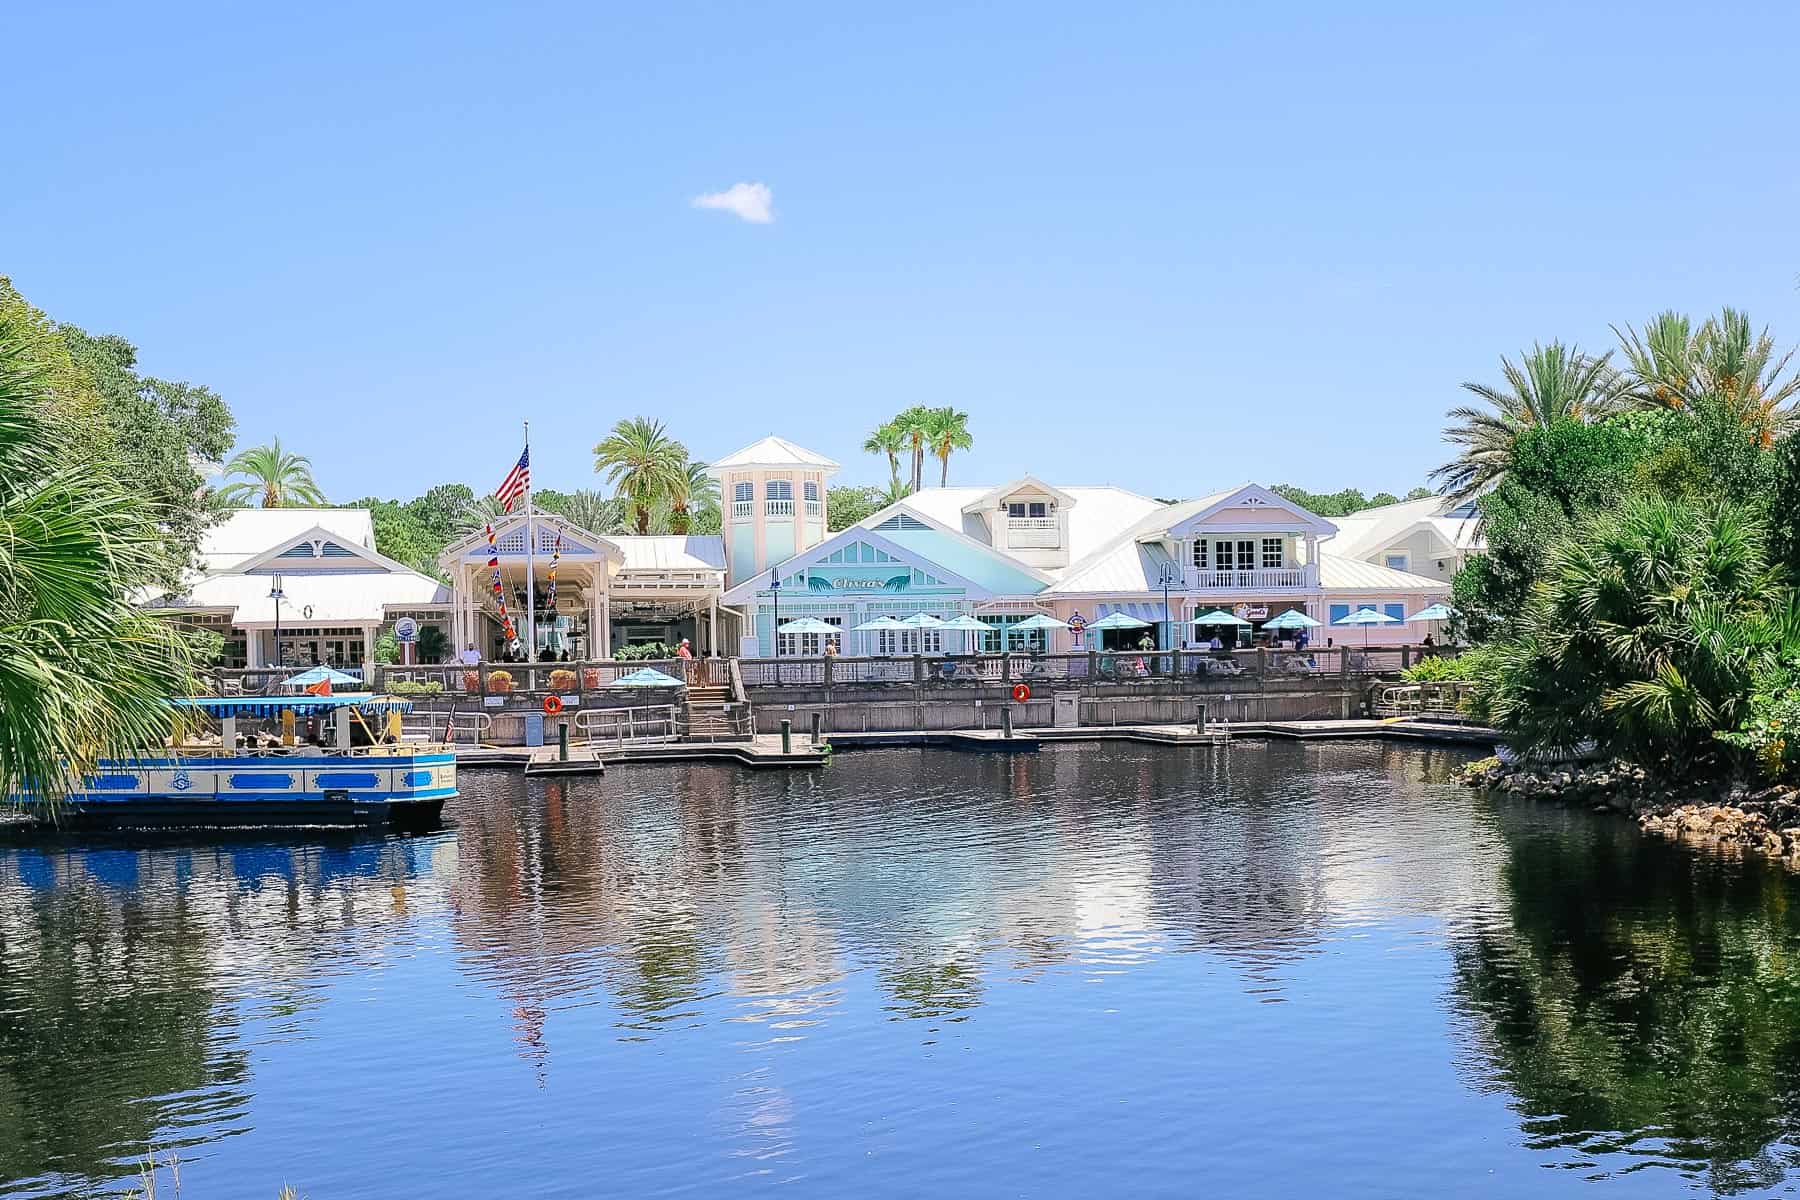 a view of Disney's Old Key West Villa Resort from the boat 